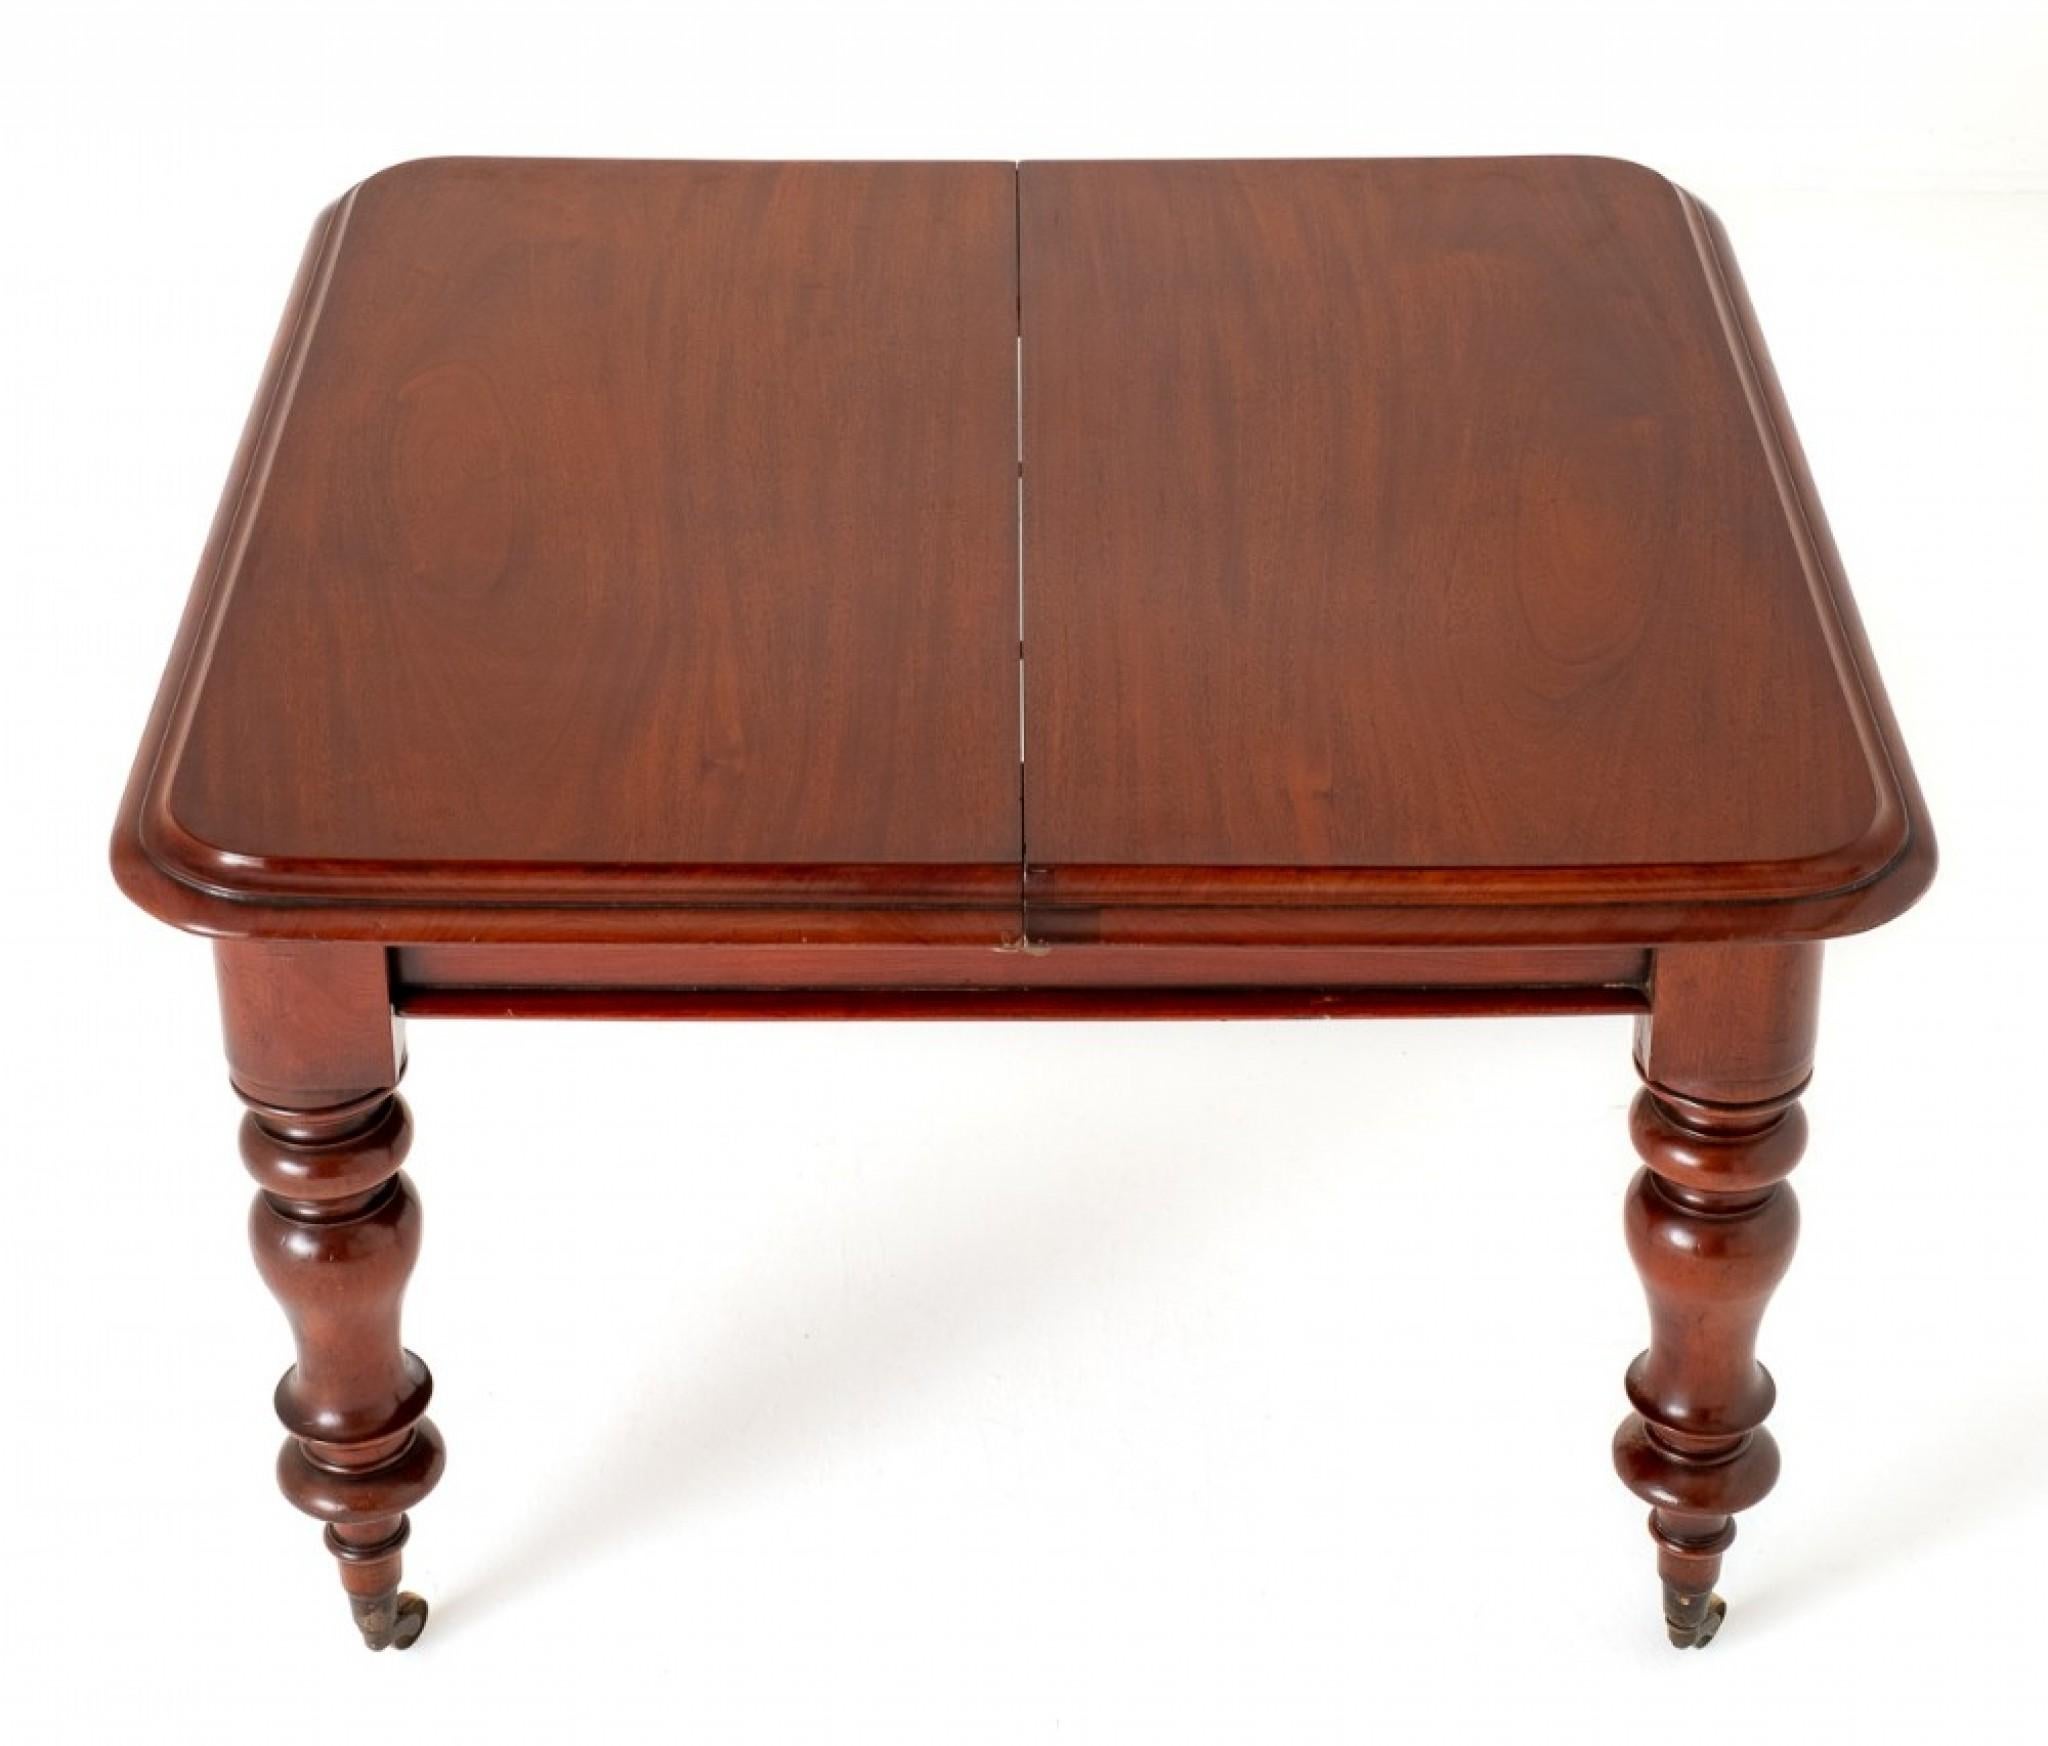 Victorian Dining Table Mahogany 2 Leaf Extending 1860 1